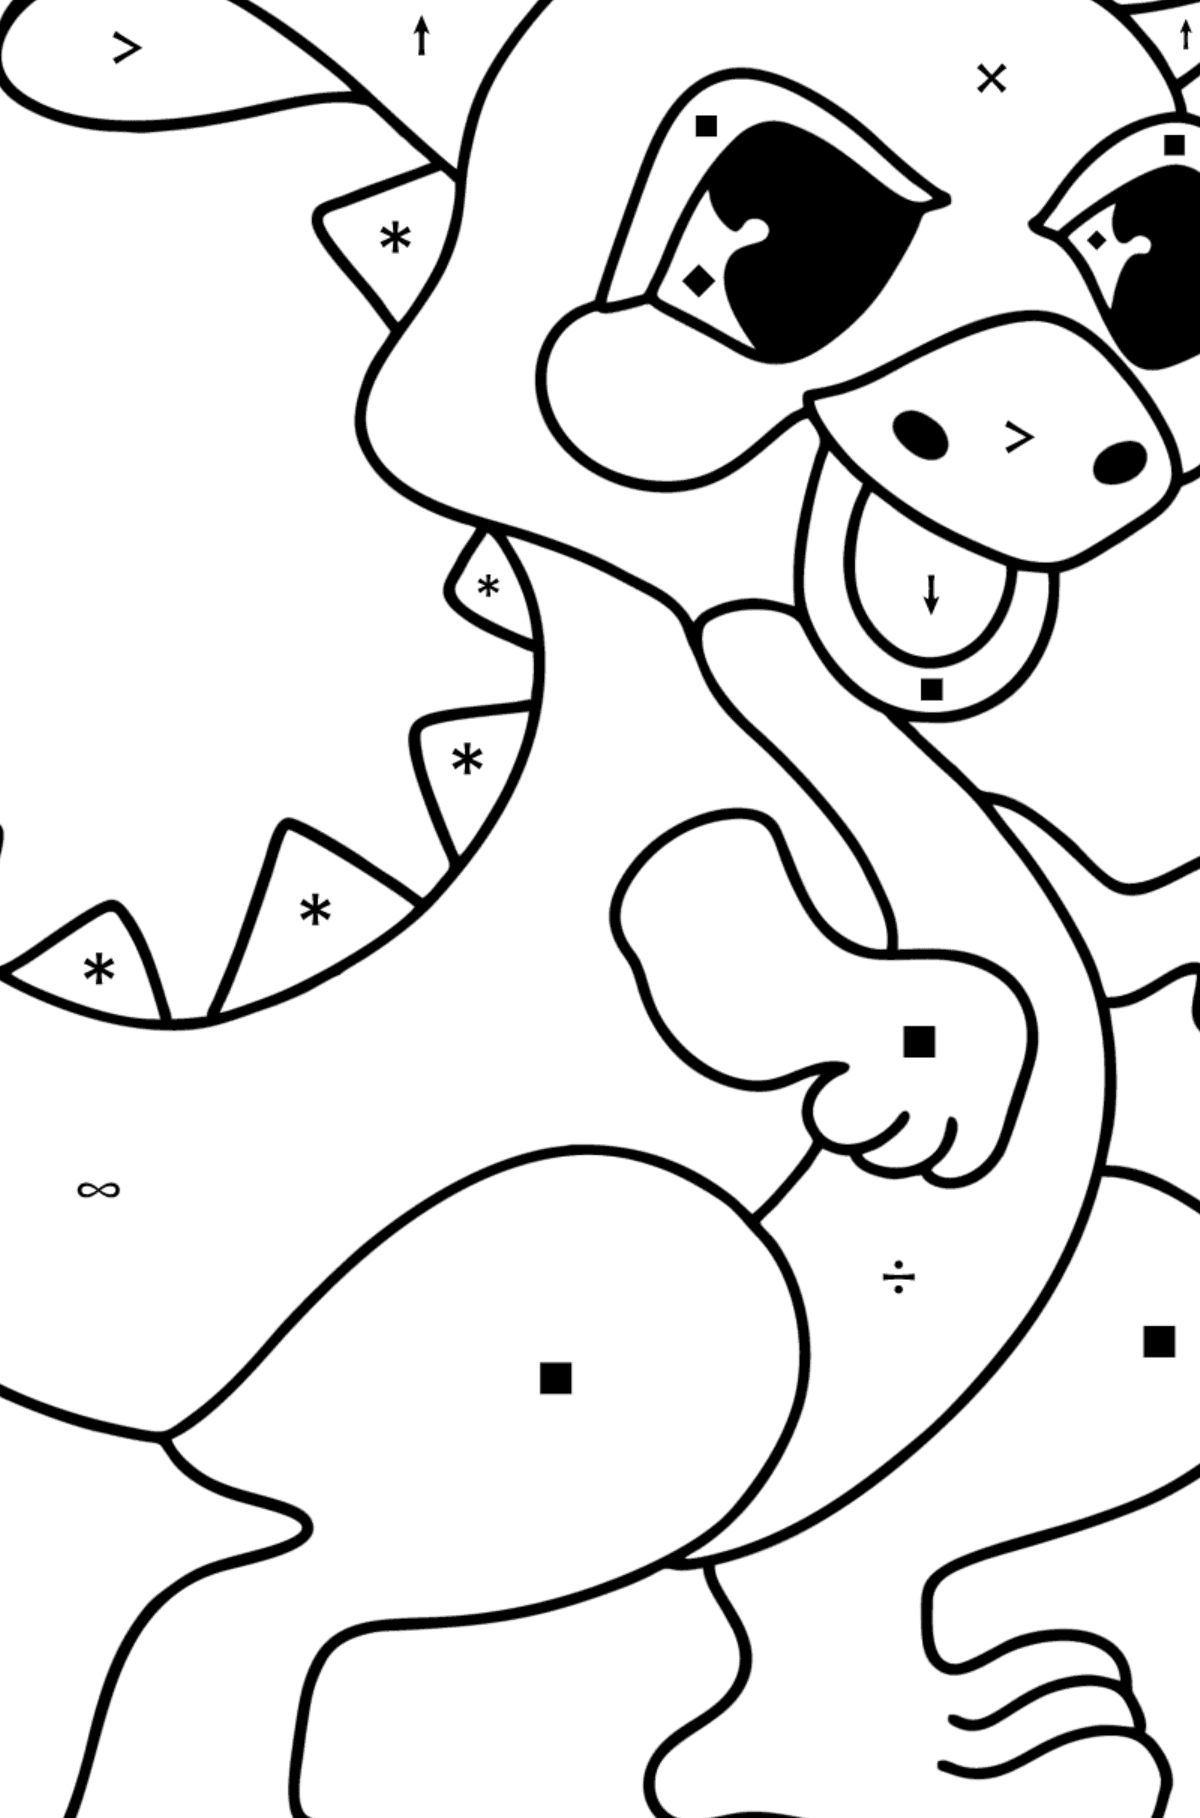 Cartoon dragon coloring page - Coloring by Symbols for Kids